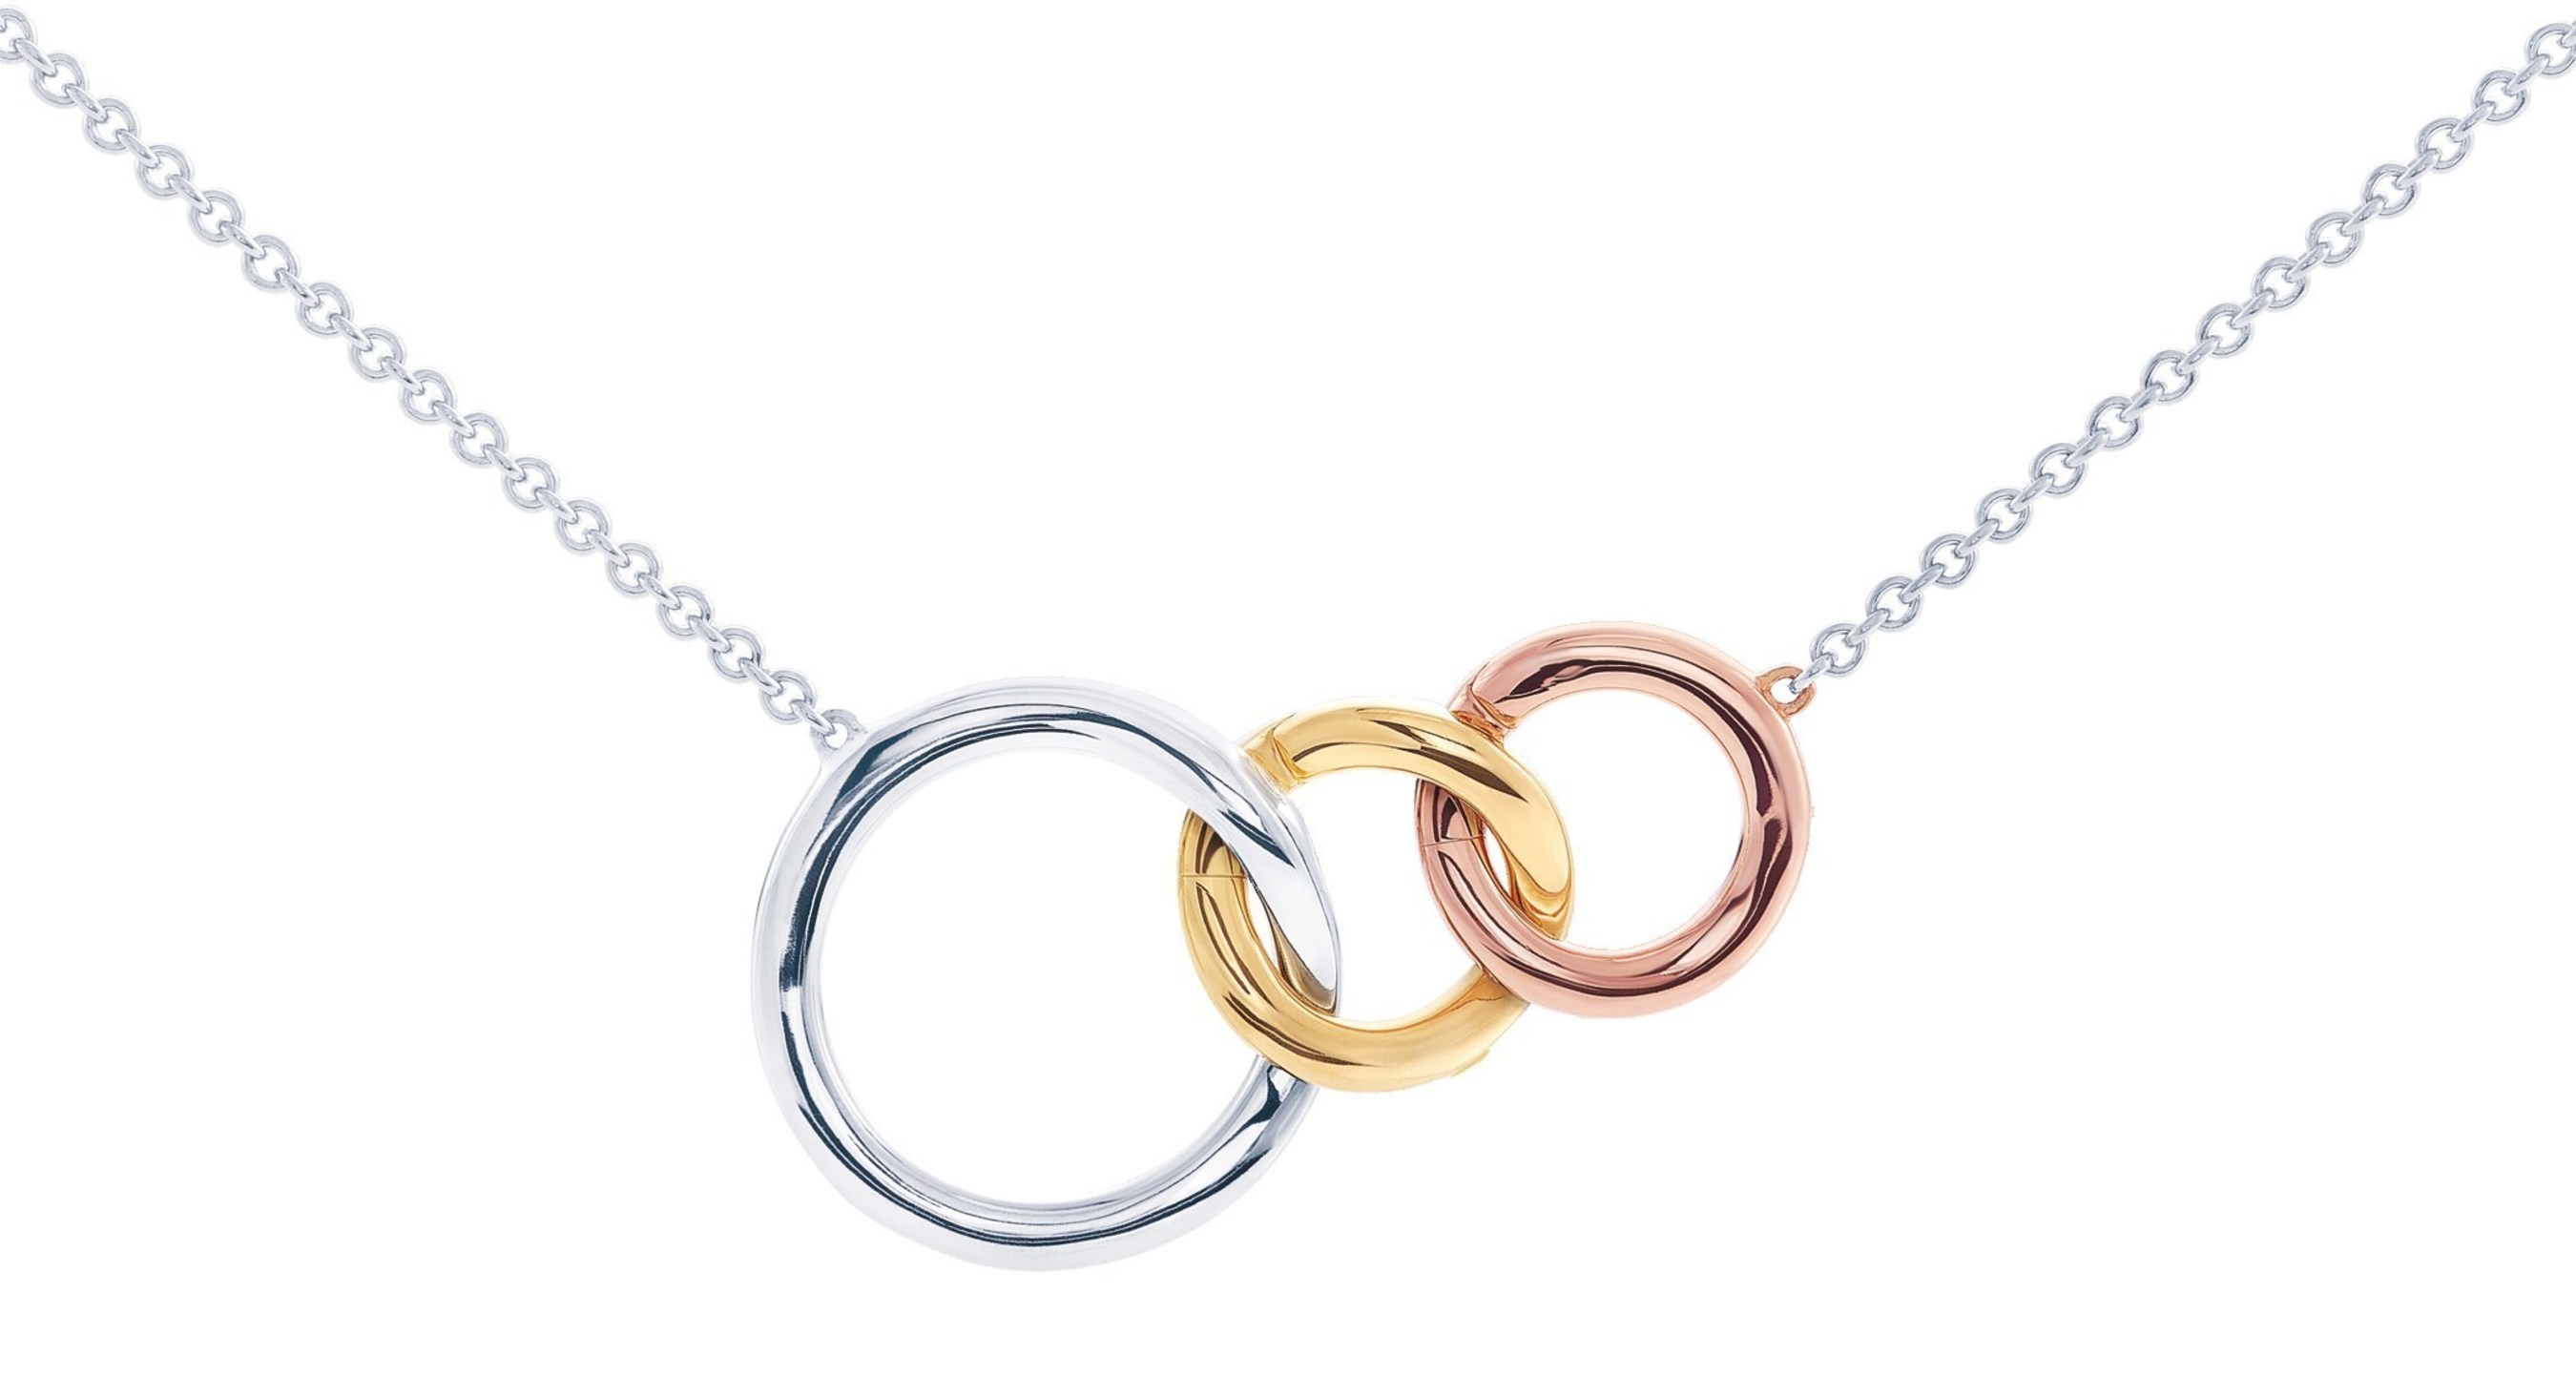 Kay(R) Jewelers Introduces Miracle Links(TM) Collection. Innovative Collection Features Unique Design to Celebrate the Miracle of Motherhood.